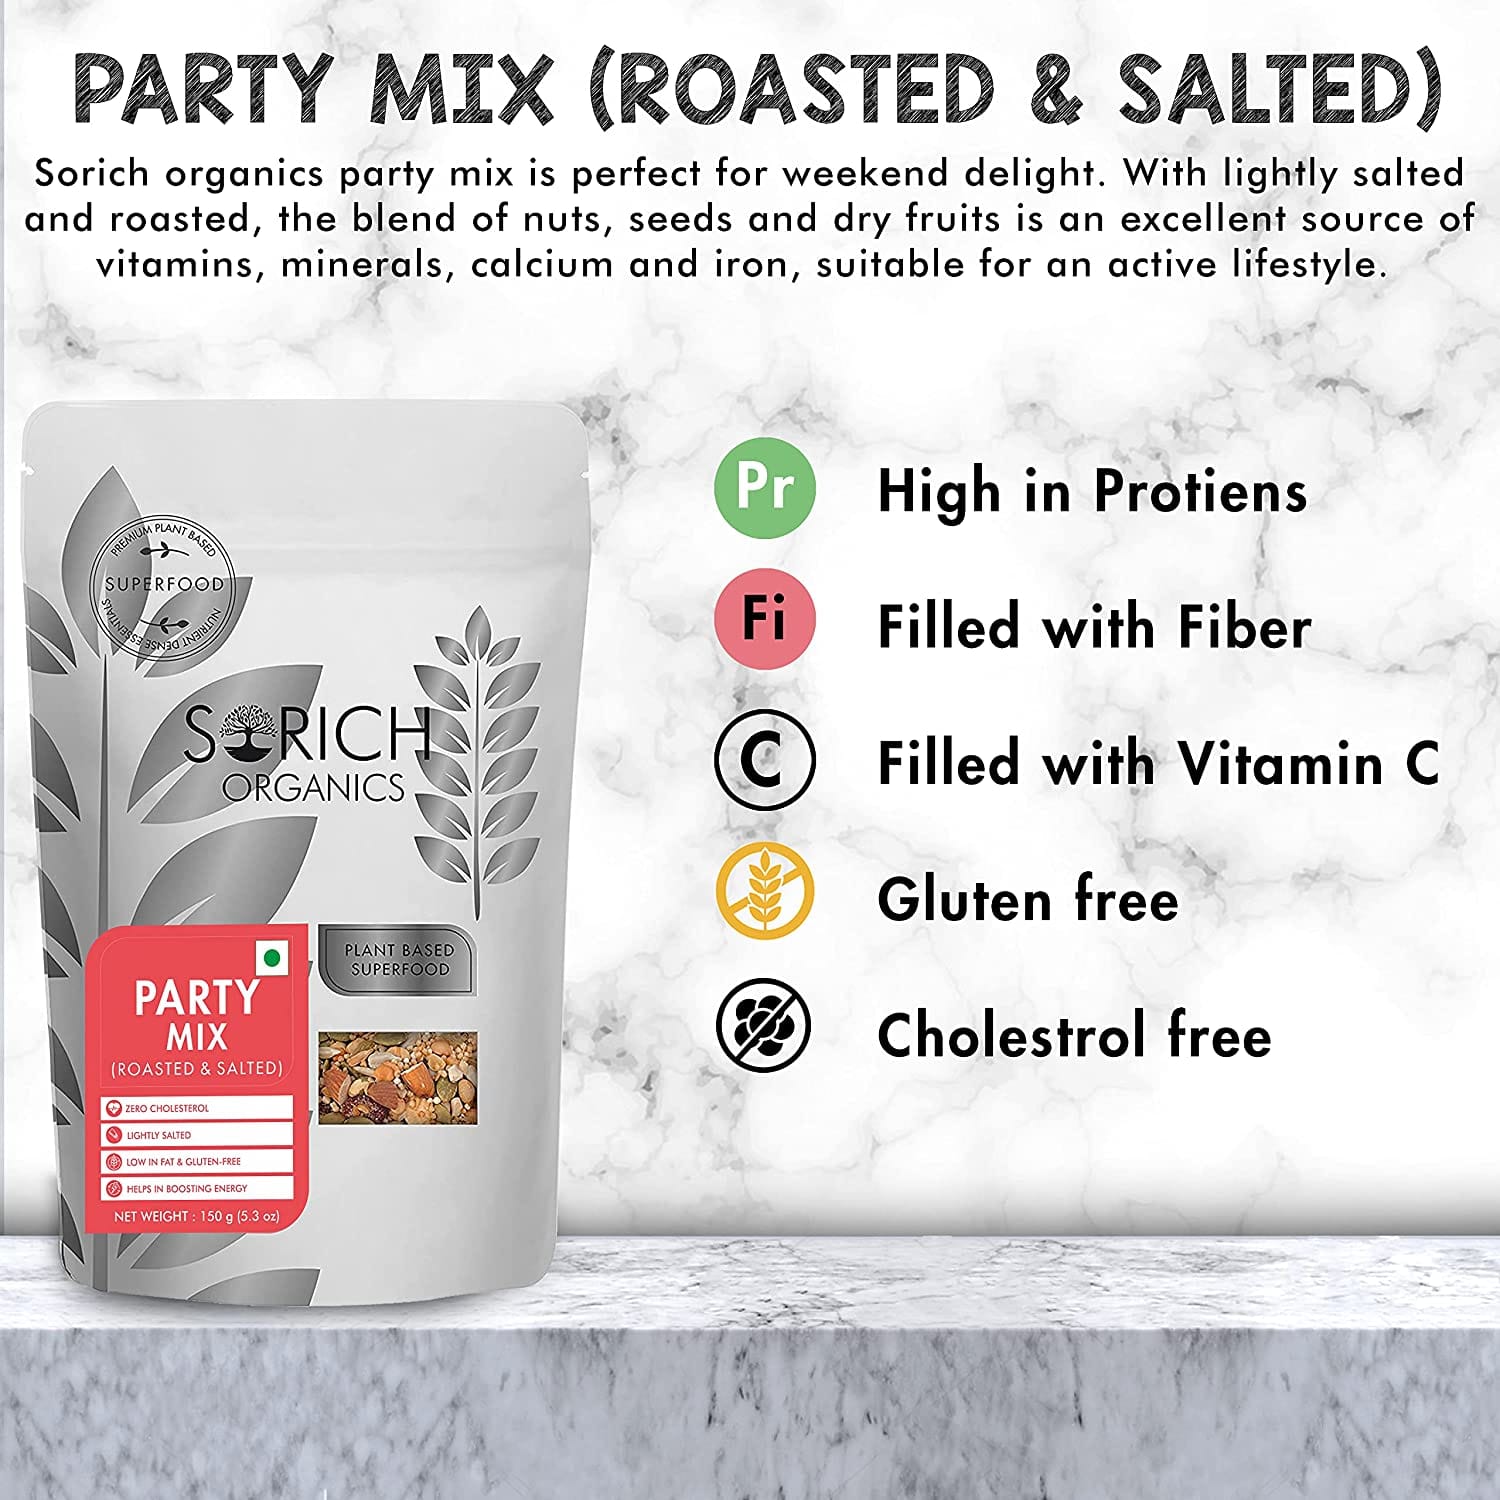 party mix roasted and salted health benefits